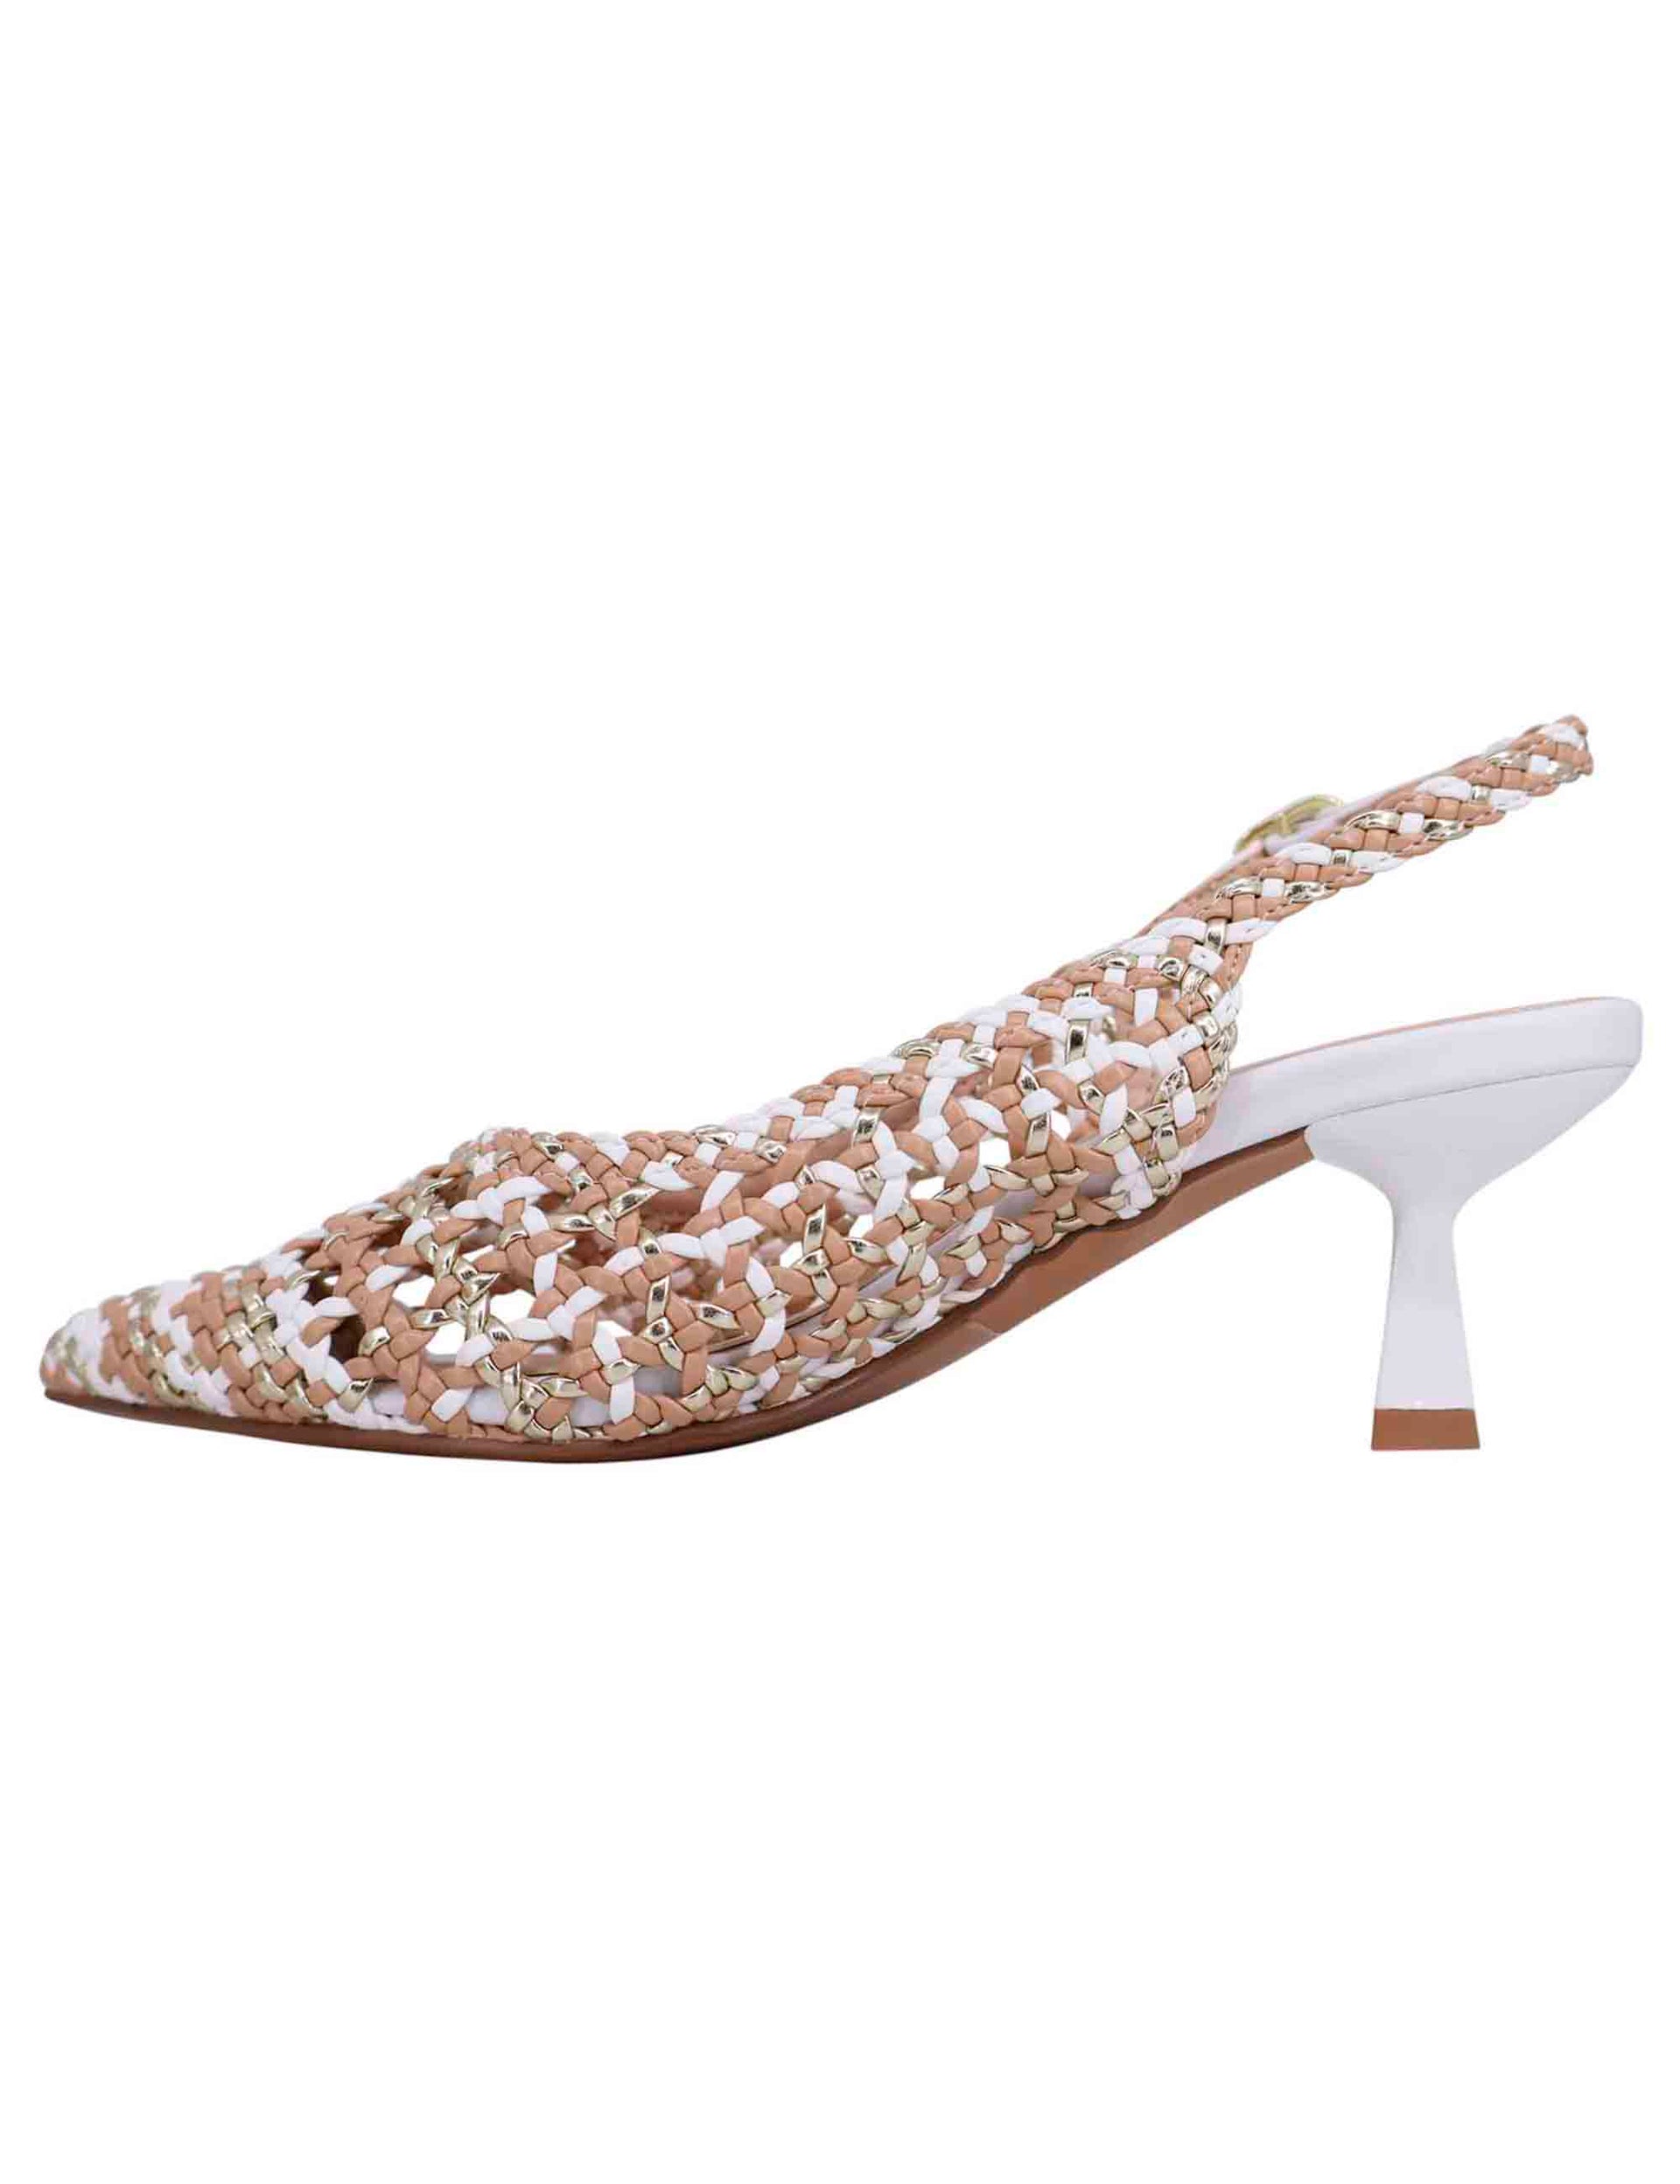 Women's slingback pumps in multicolored bronze laminated eco leather with white heels